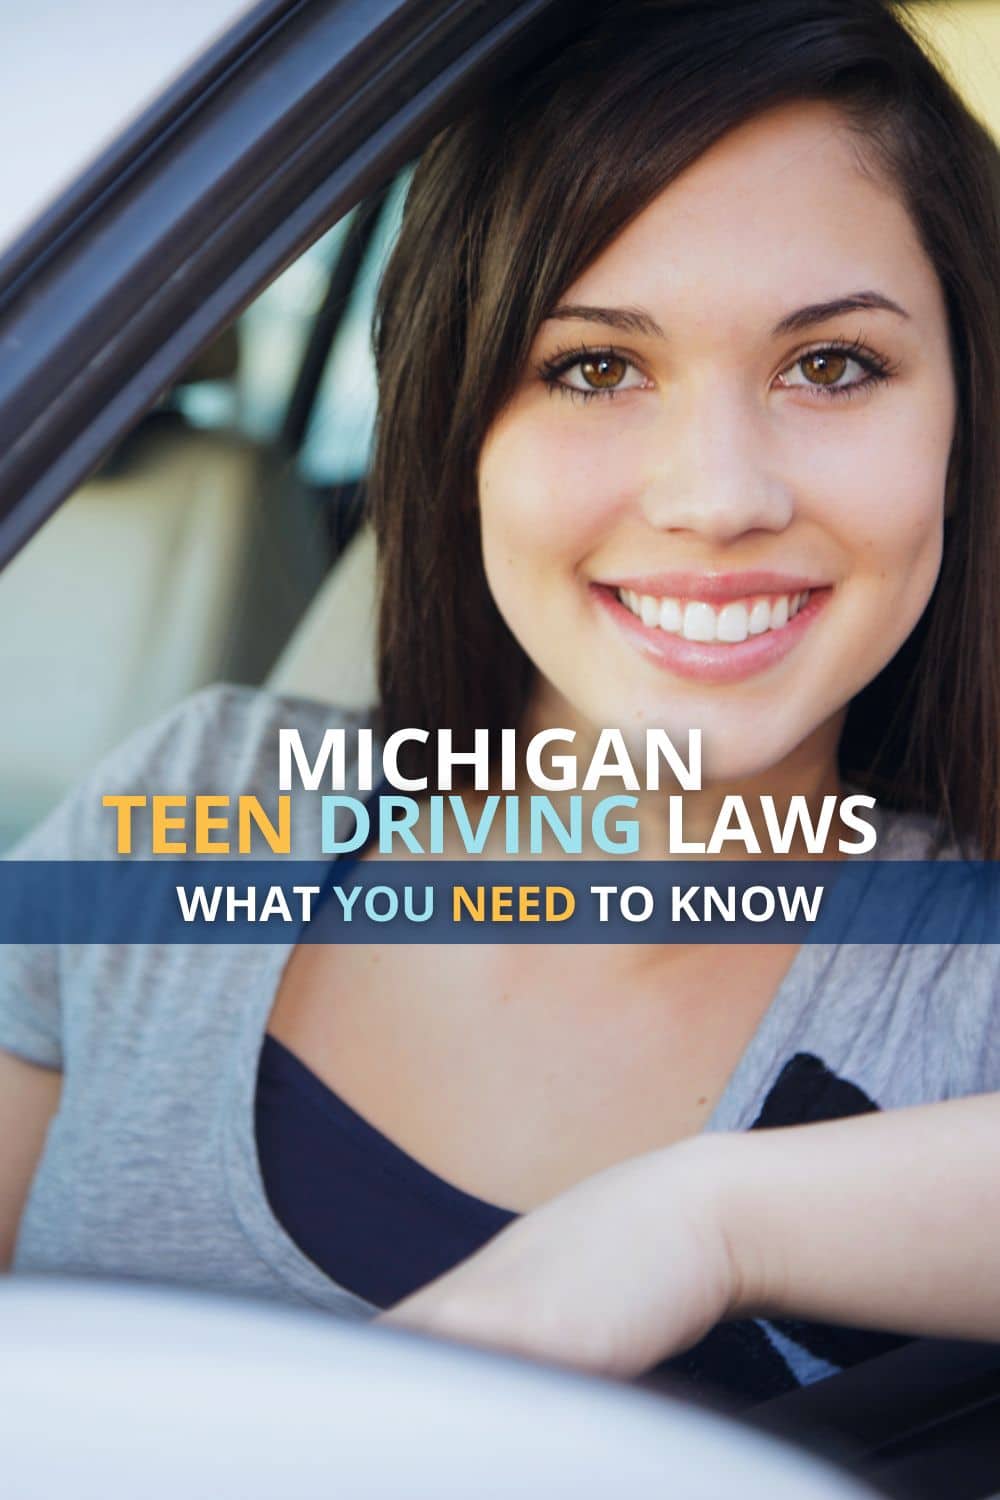 Michigan Teen Driving Laws: What You Need To Know